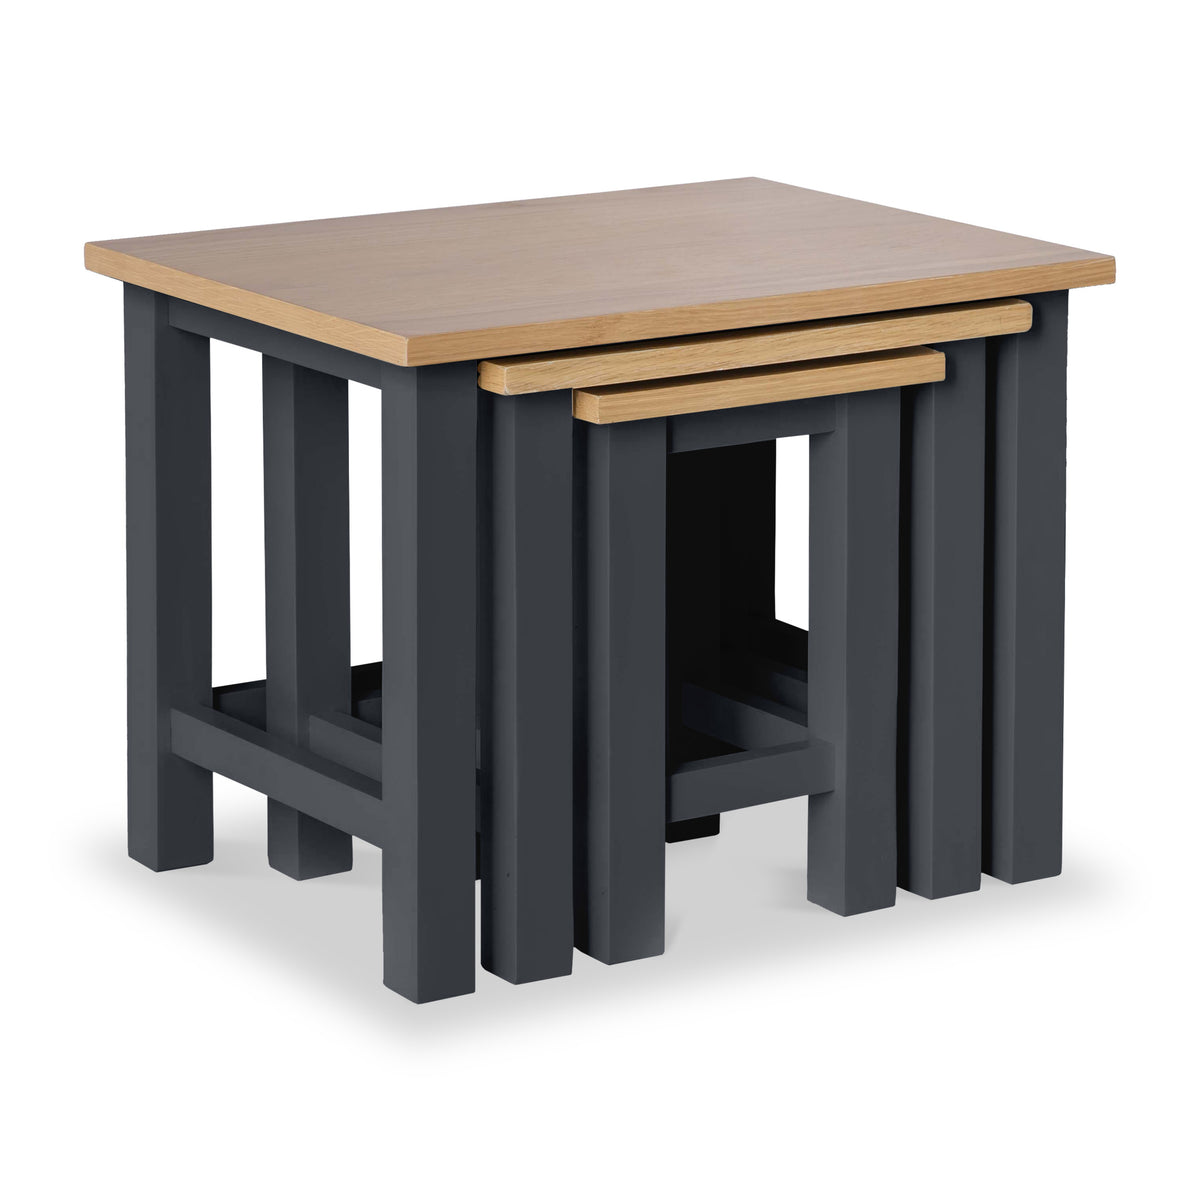 Farrow Charcoal Nest of Tables from Roseland